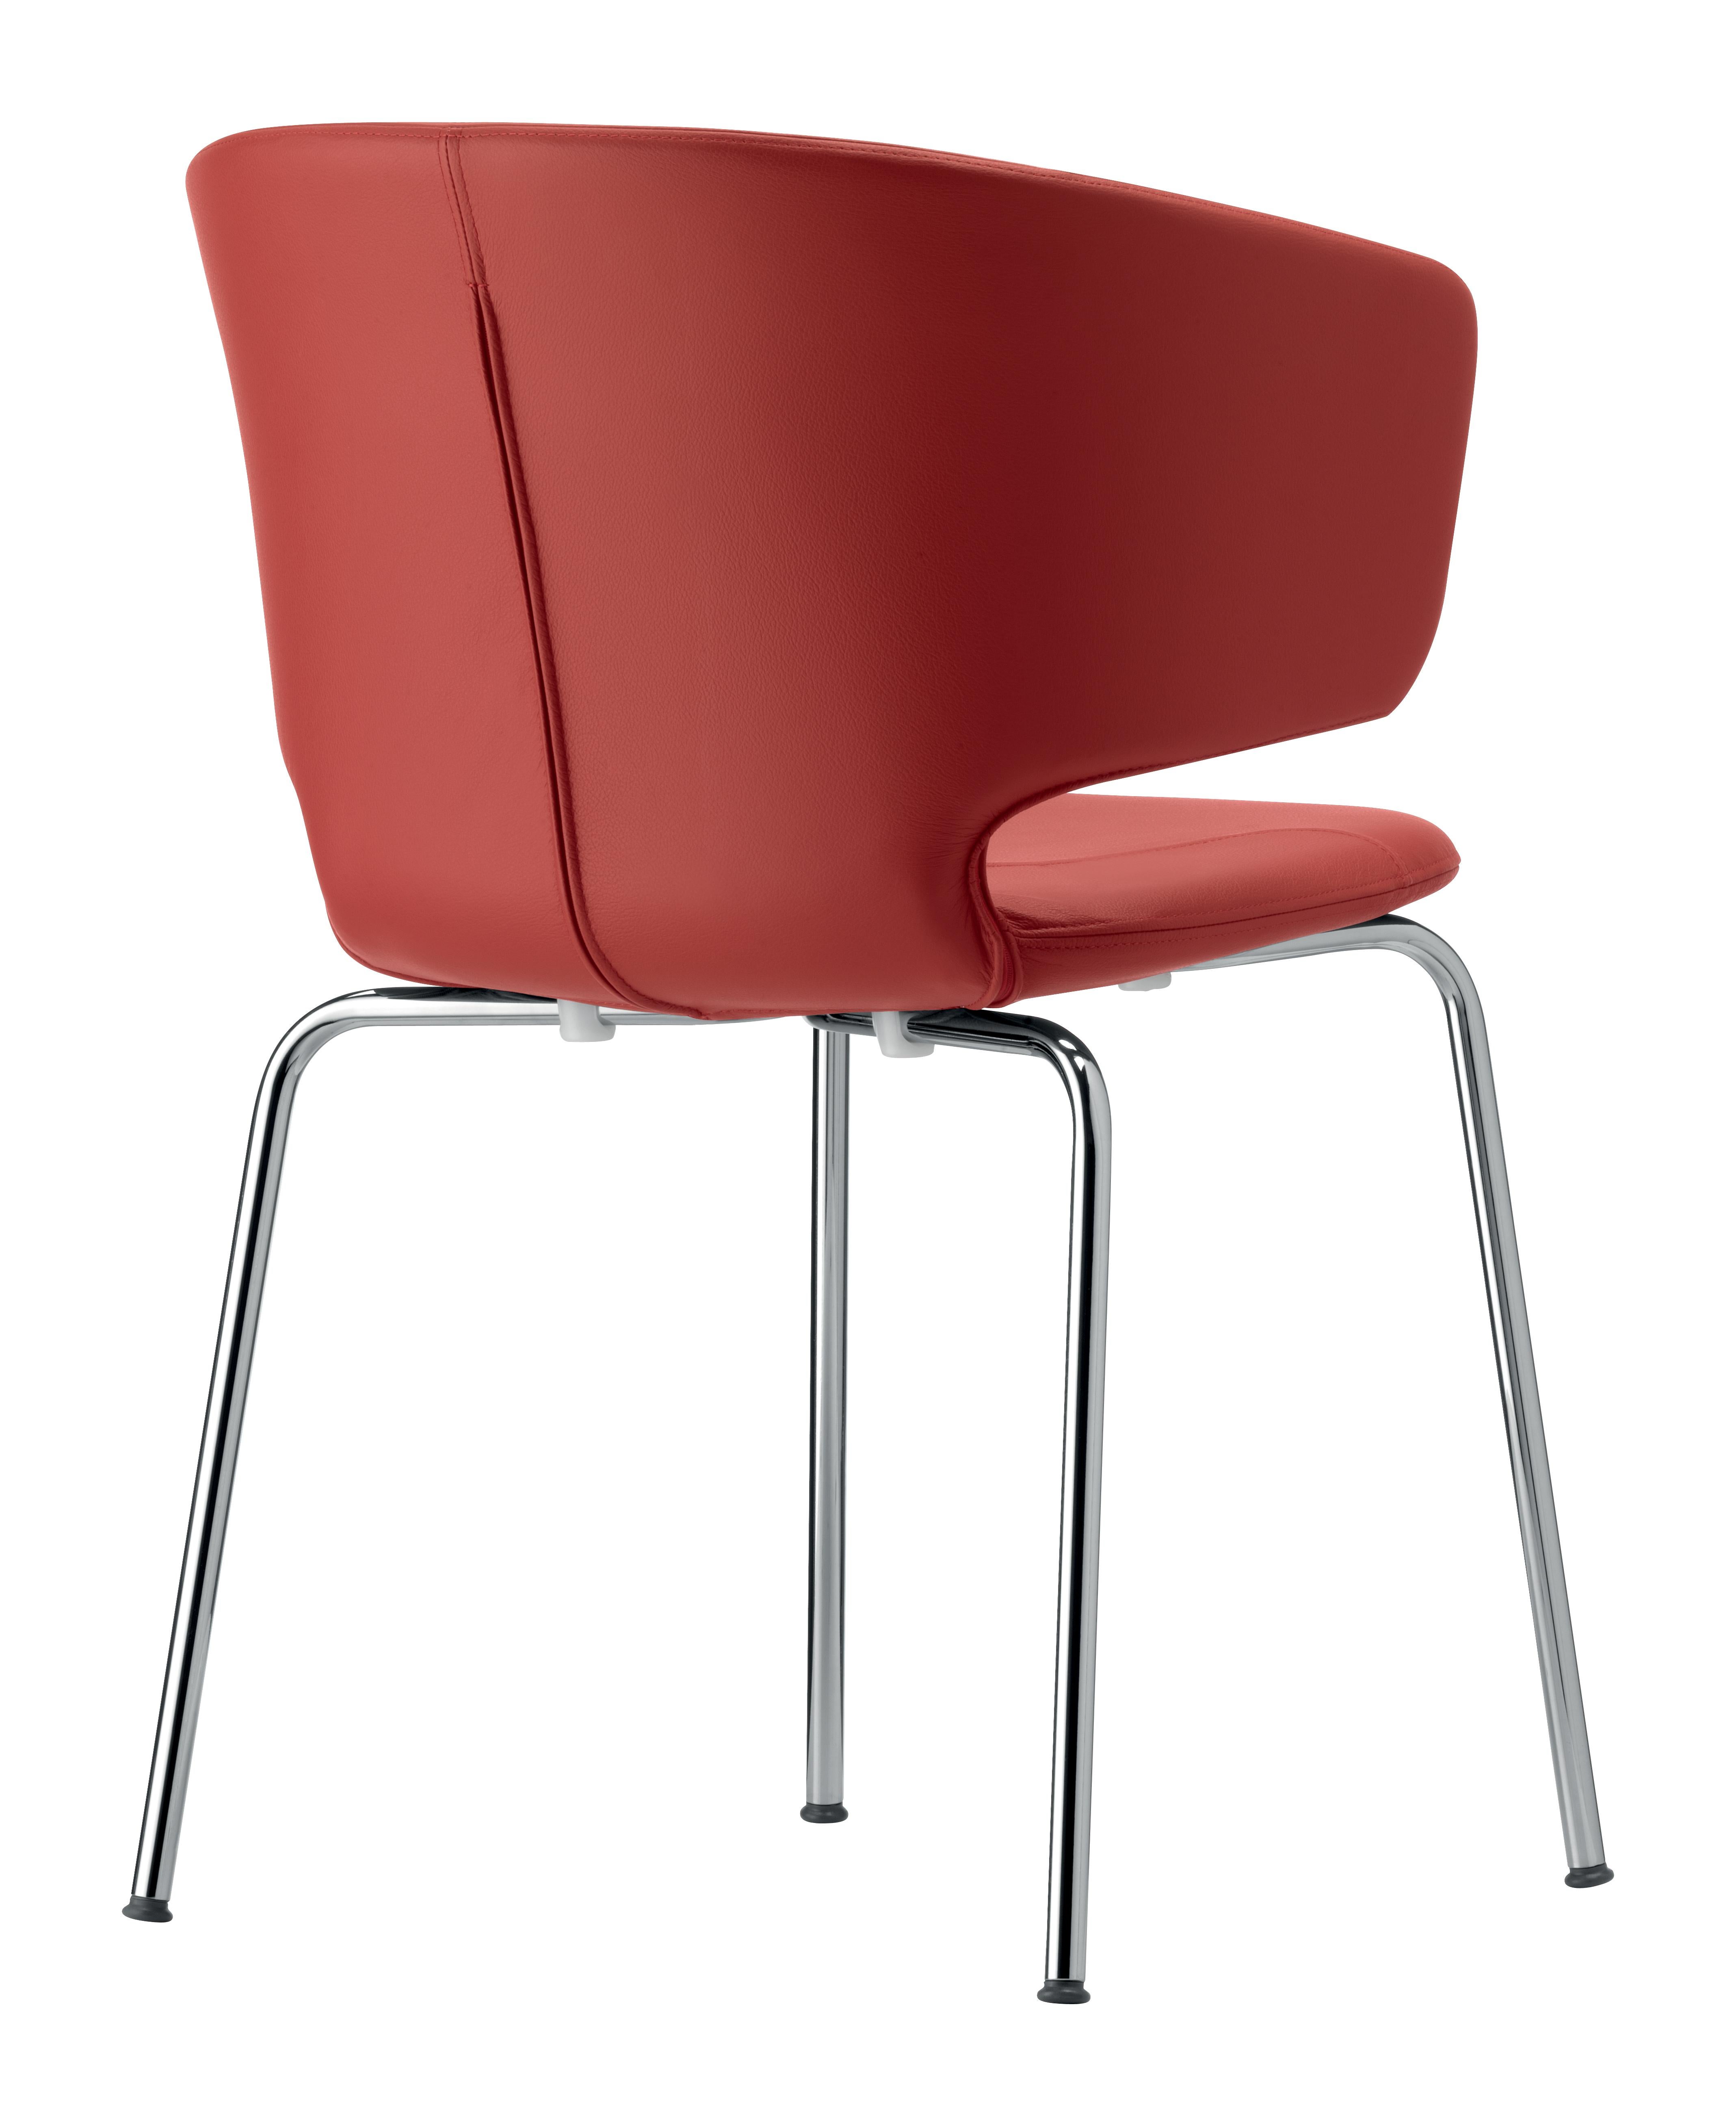 Italian Alias 503 Taormina Chair in Red Seat and Chromed Steel Frame by Alfredo Häberli For Sale